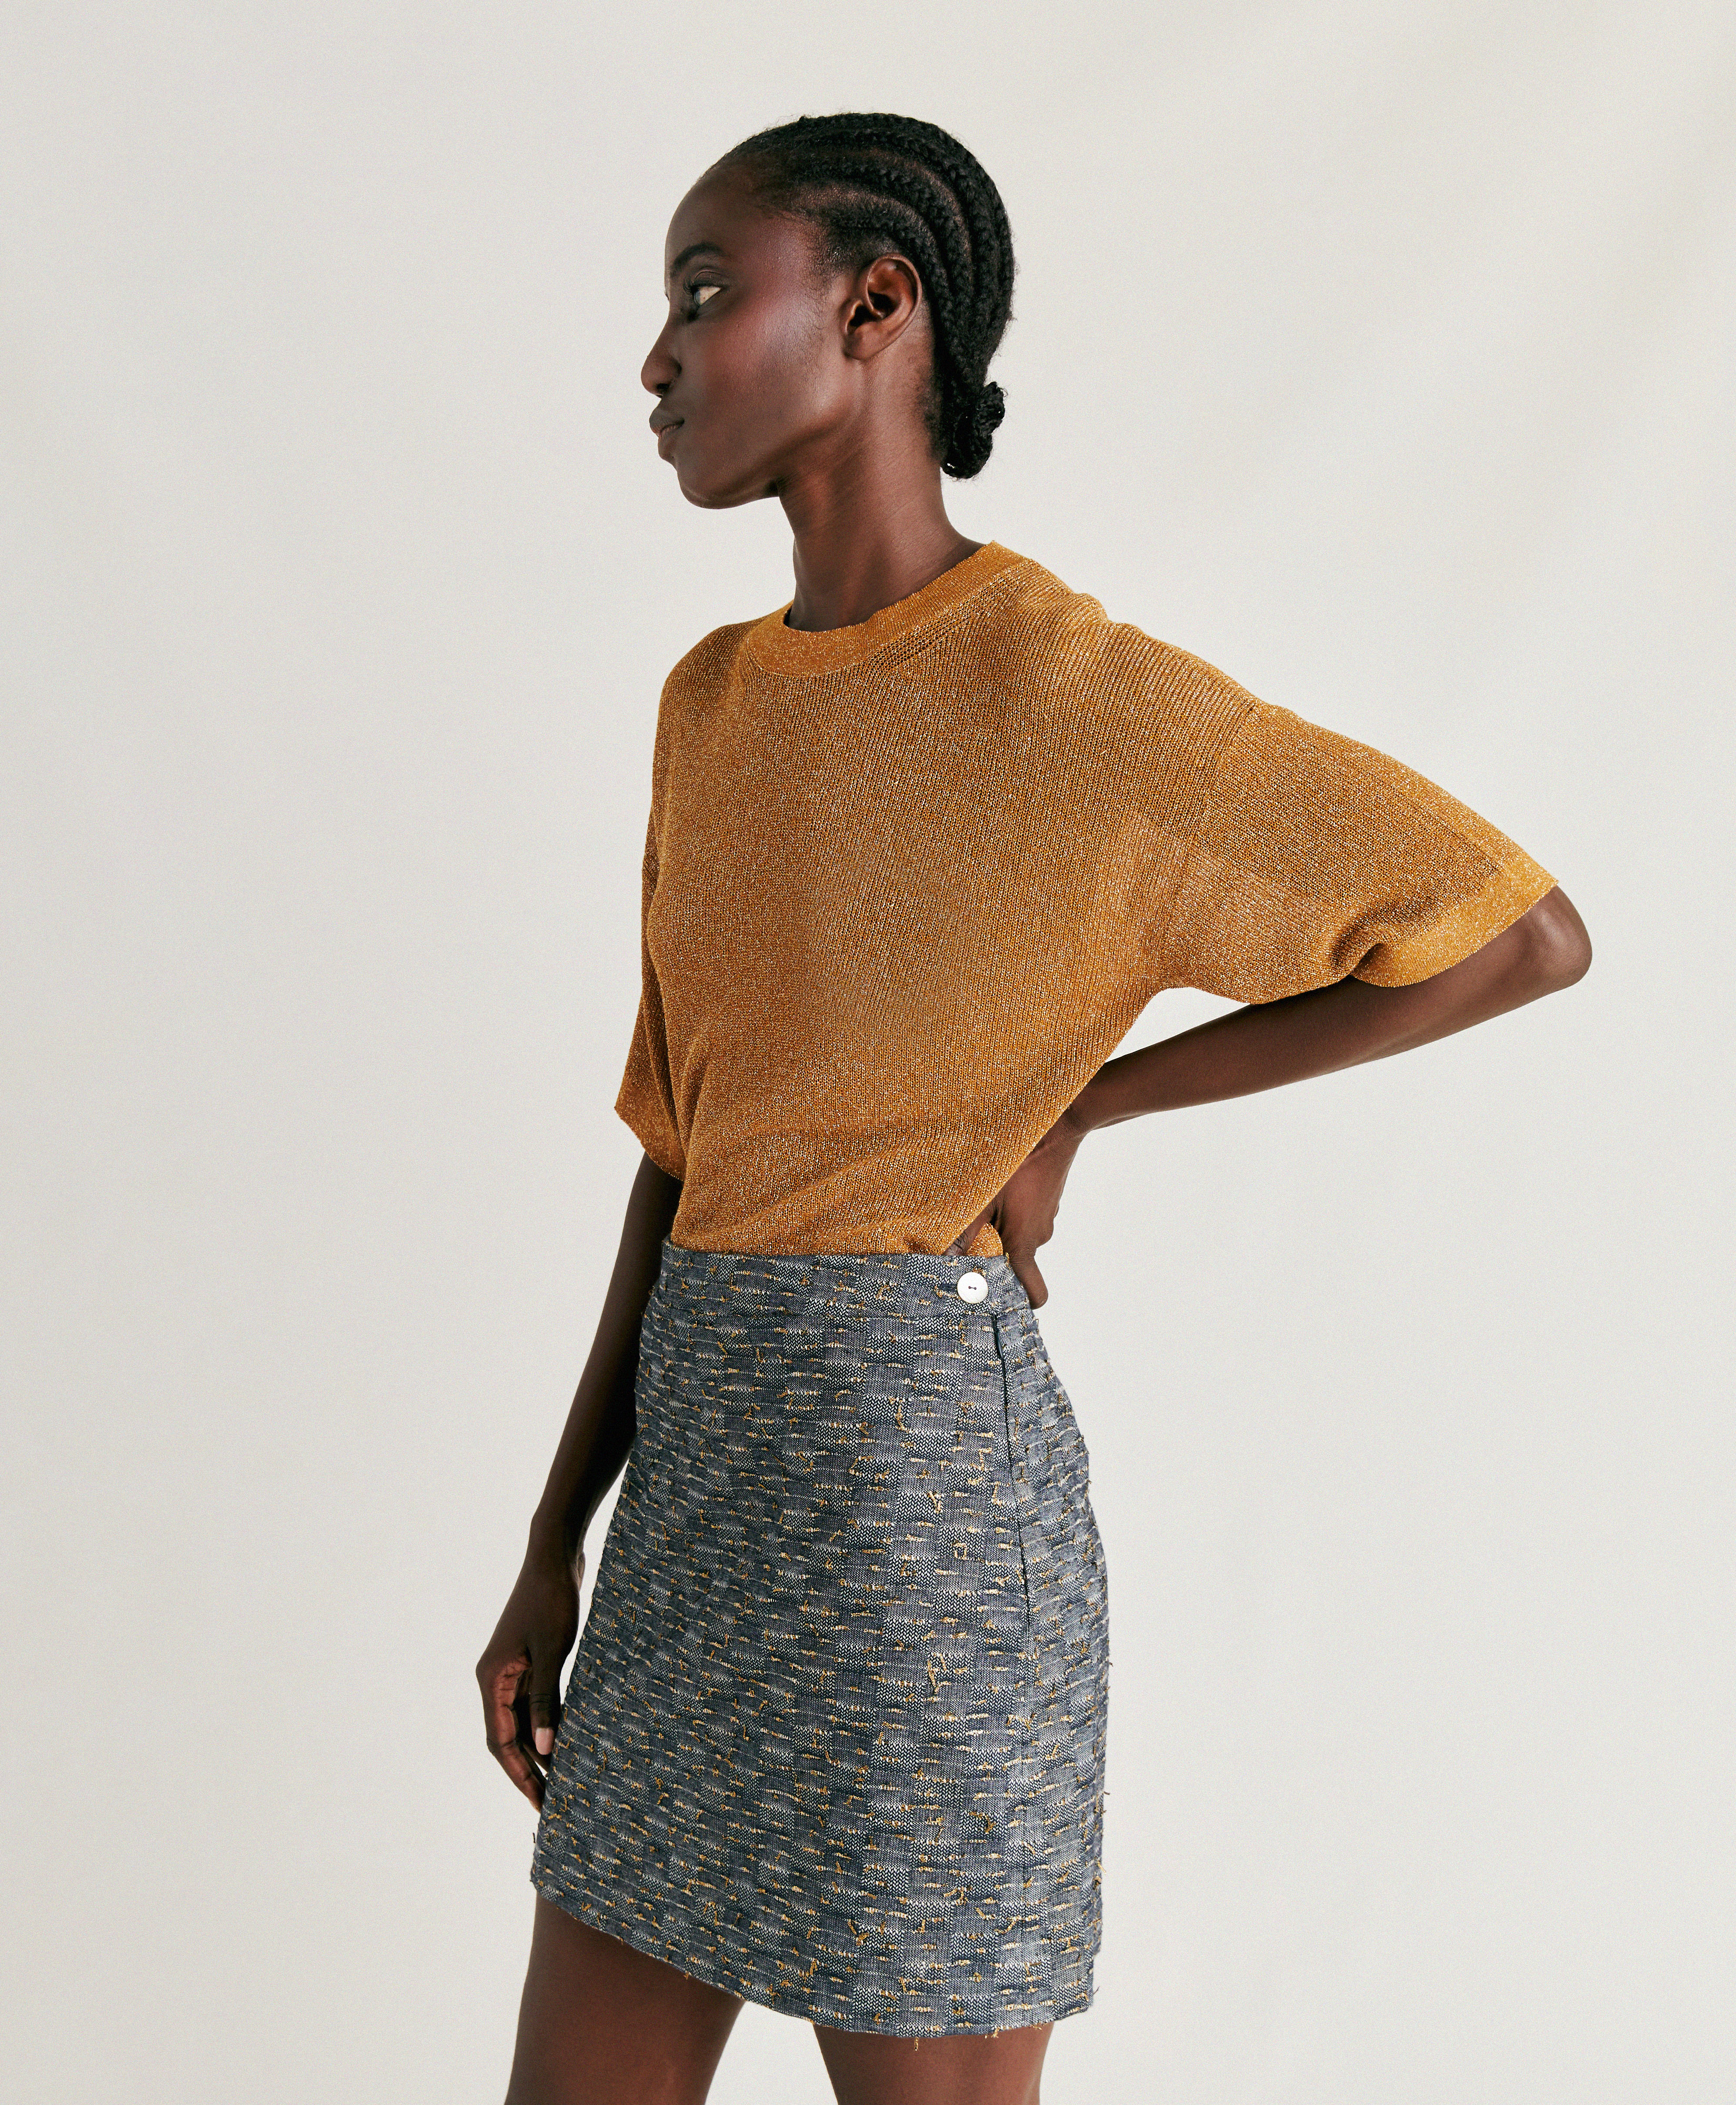 SIRENE SKIRT IN BASKETWEAVE WITH GOLD FIL COUPÉ - BLUE/GOLD - Momonì